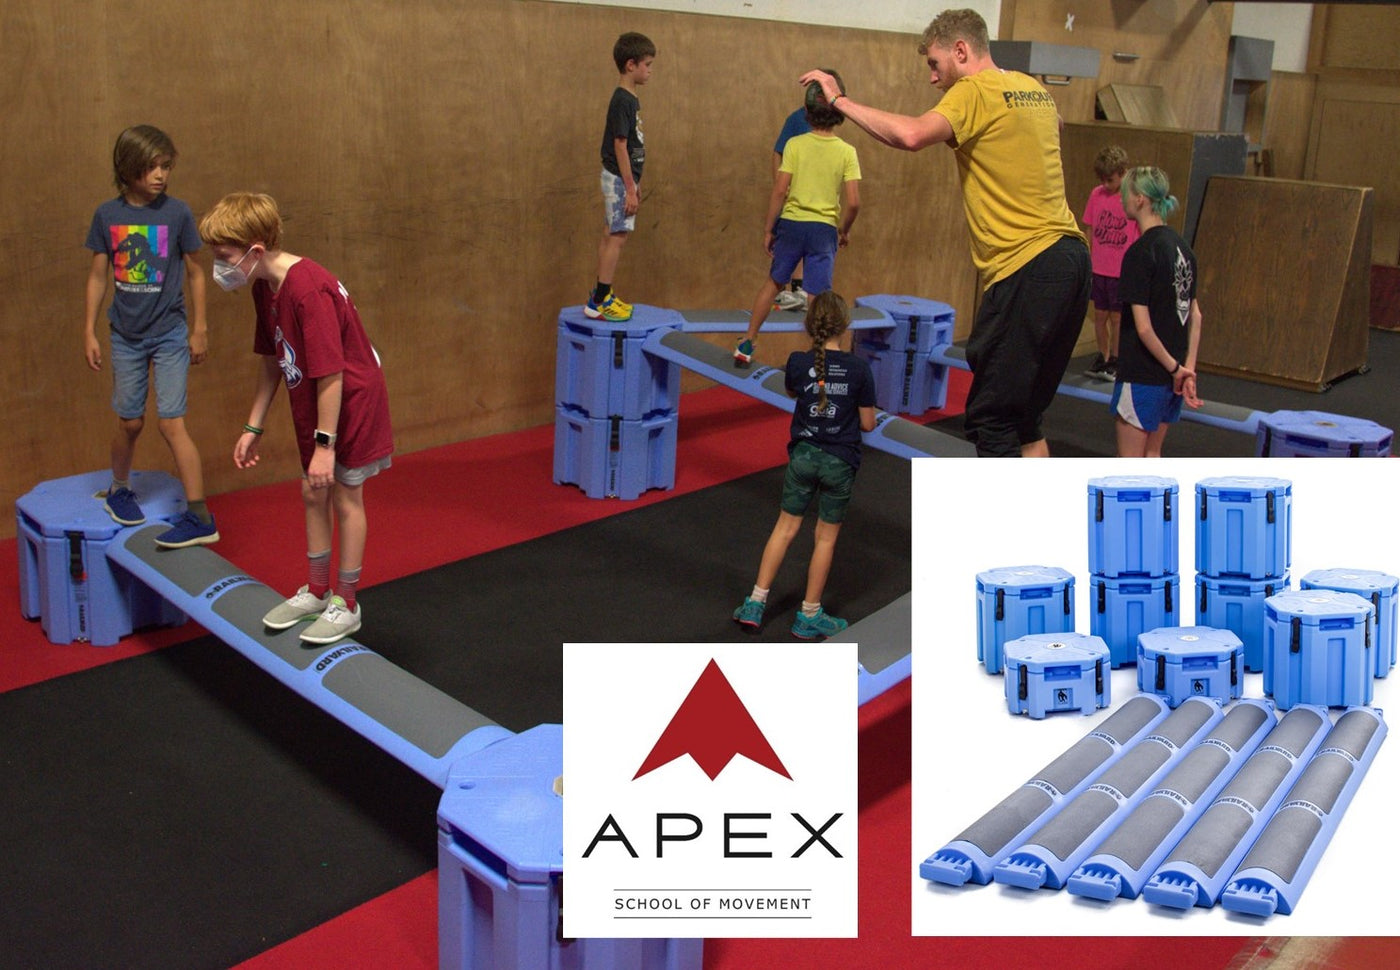 APEX Parkour For Kids Course and training package - Railyard Fitness Obstacle Course